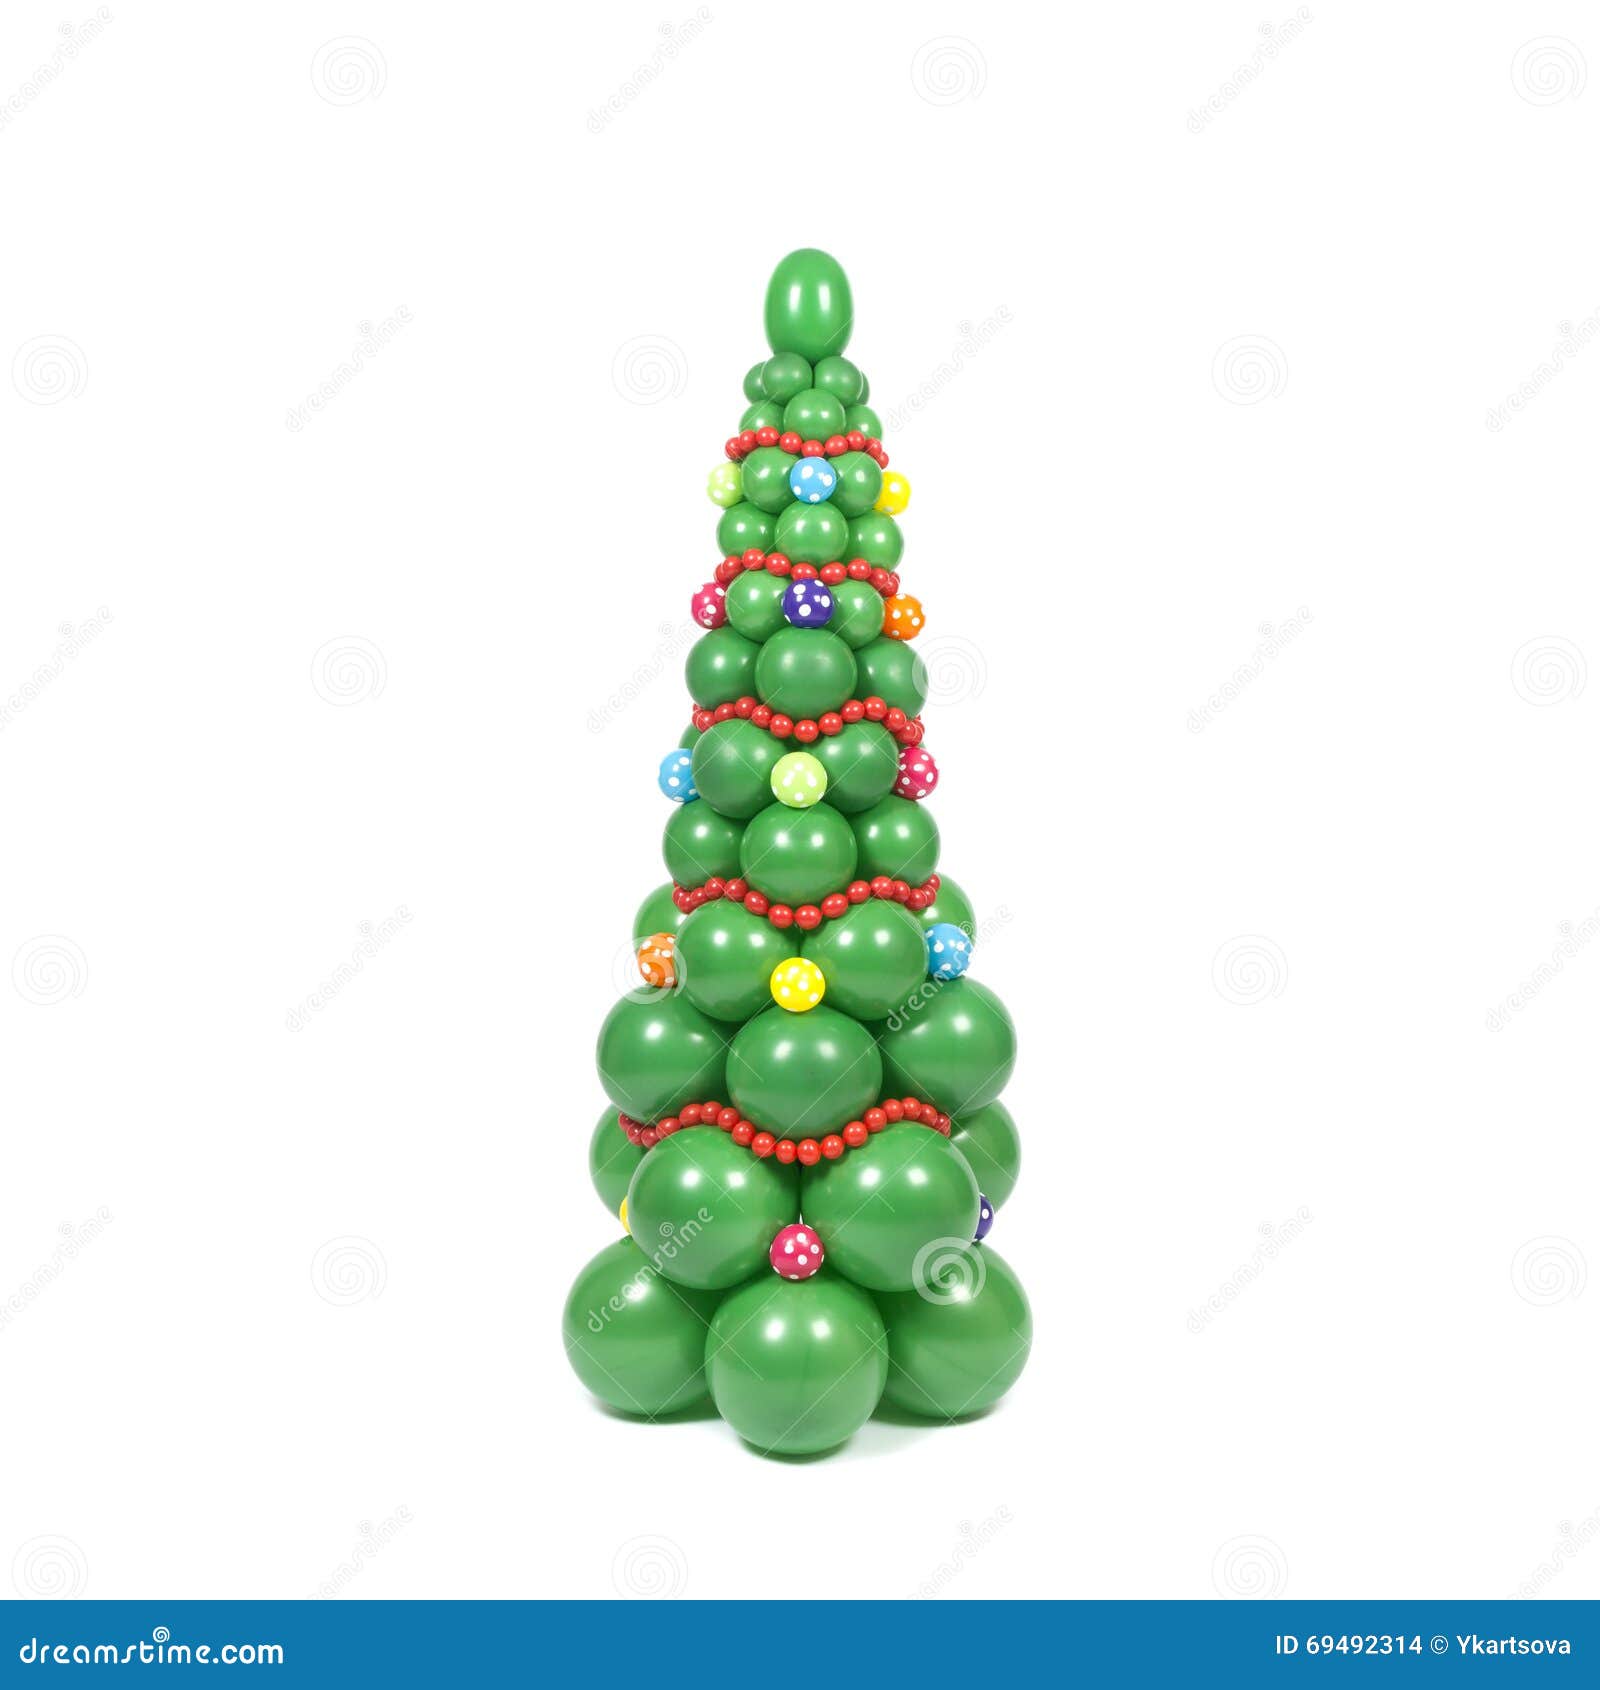 Christmas Tree From Balloons Stock Photo - Image: 69492314